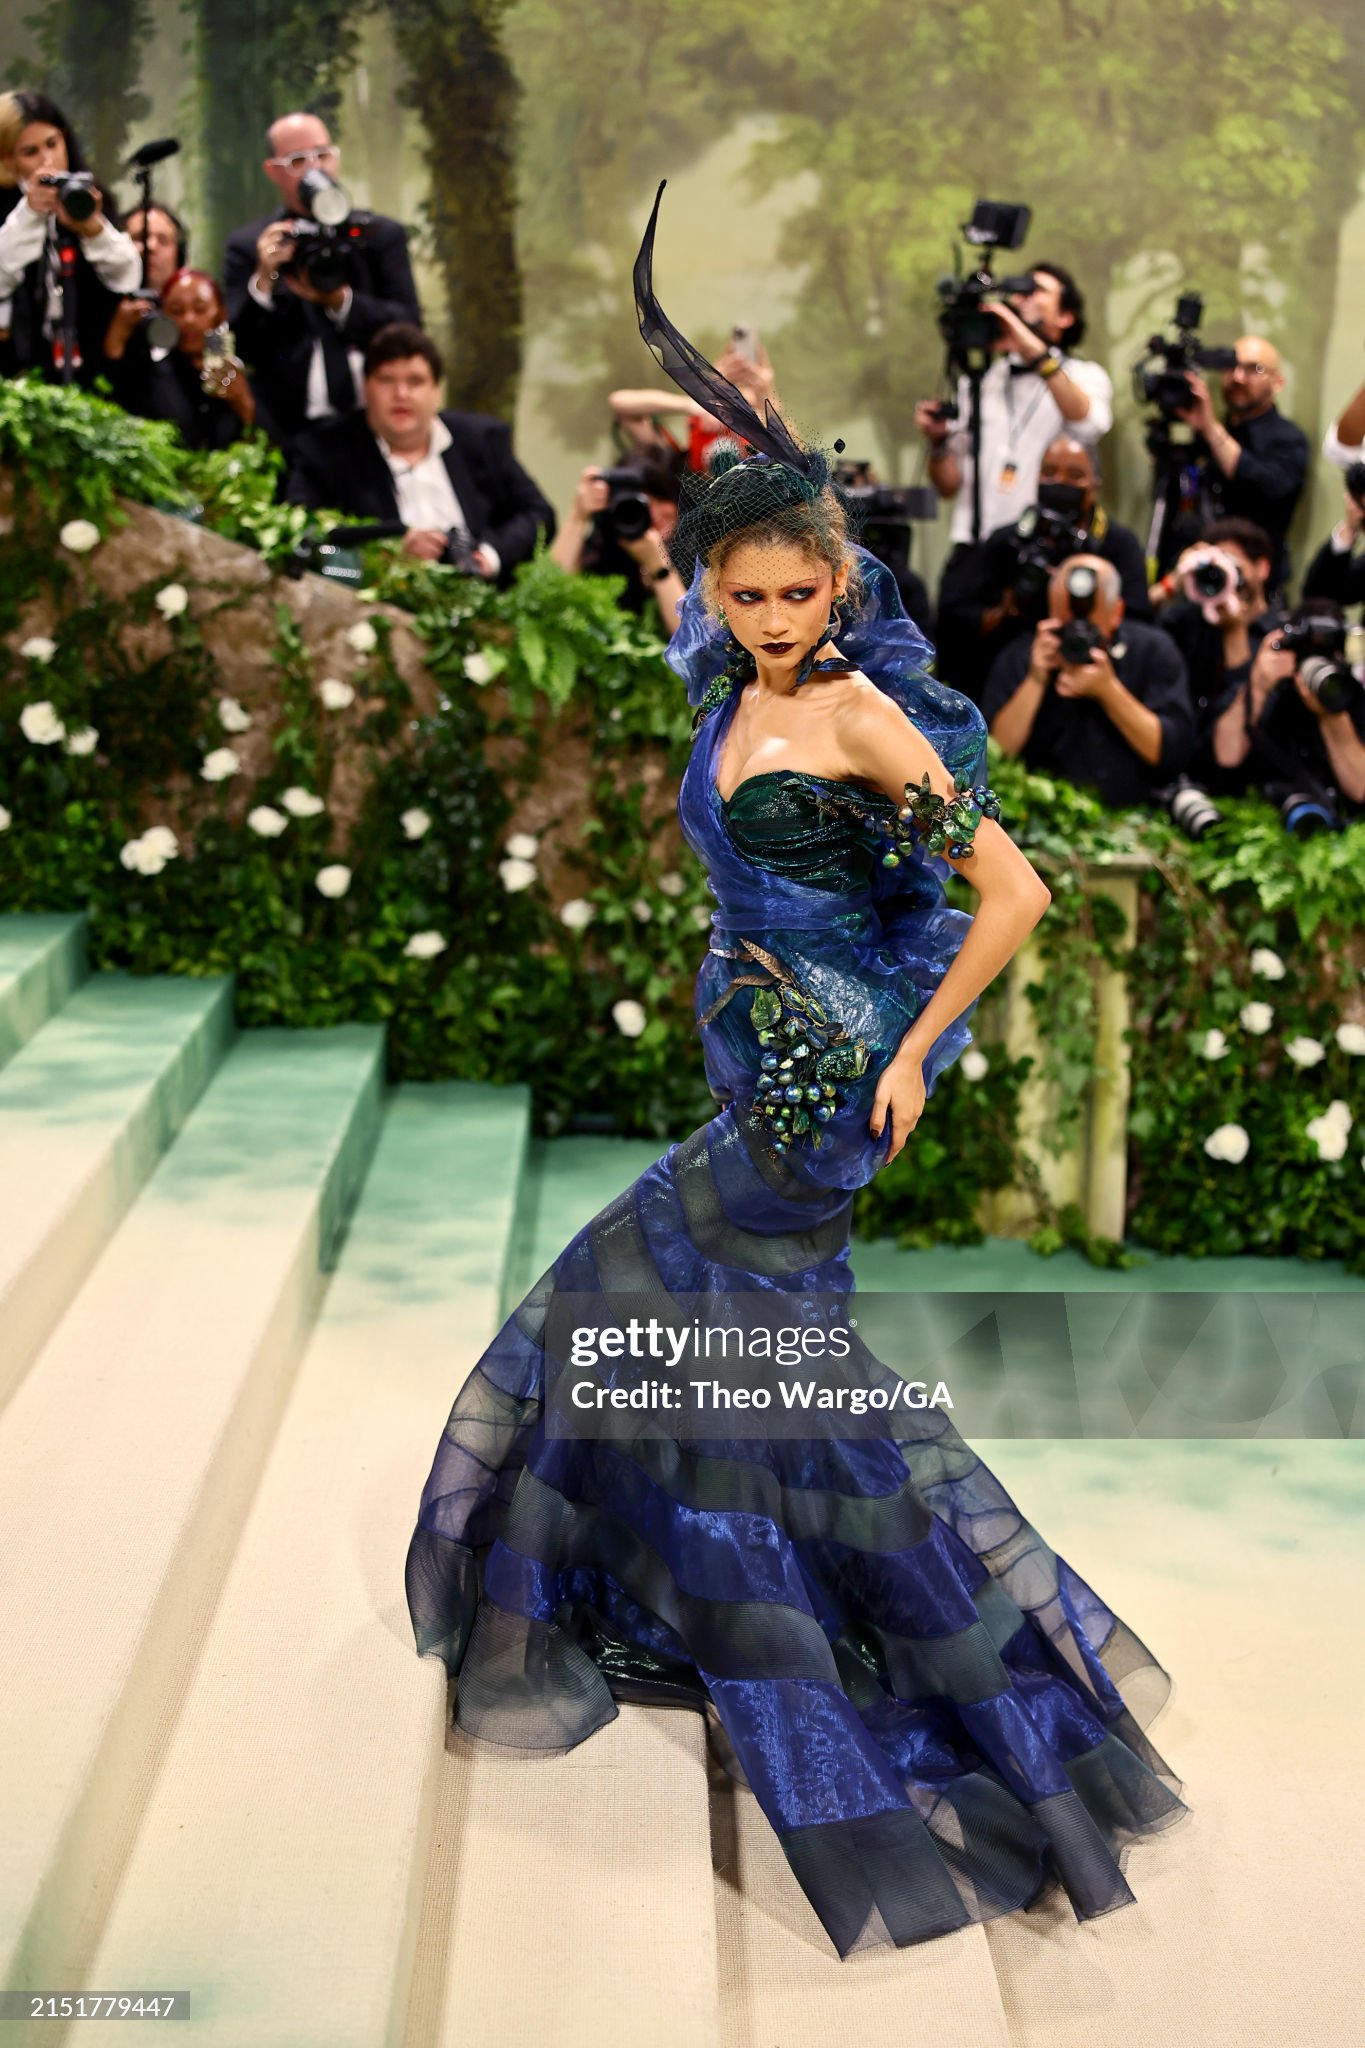 gettyimages-2151779447-2048x2048.jpg